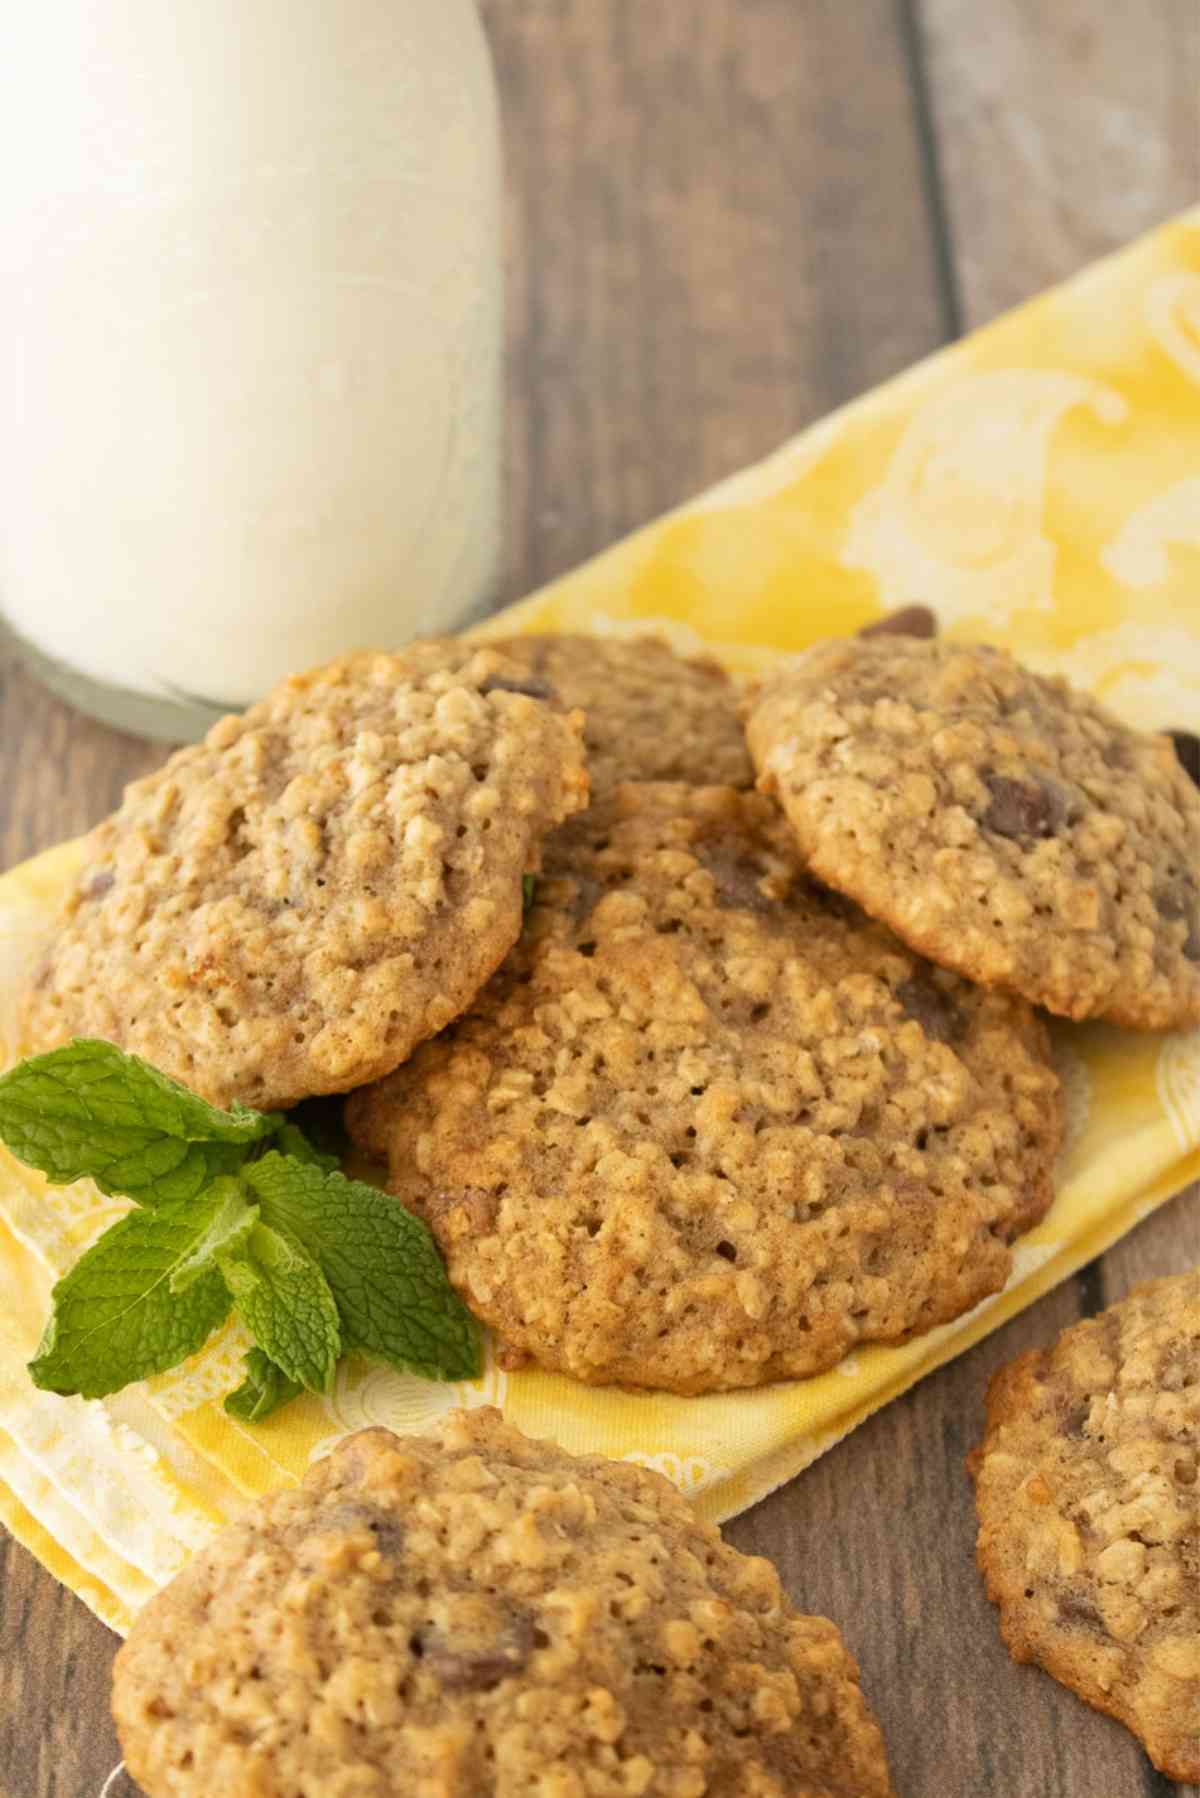 Banana Oatmeal chocolate chip cookies with a tall glass of milk.